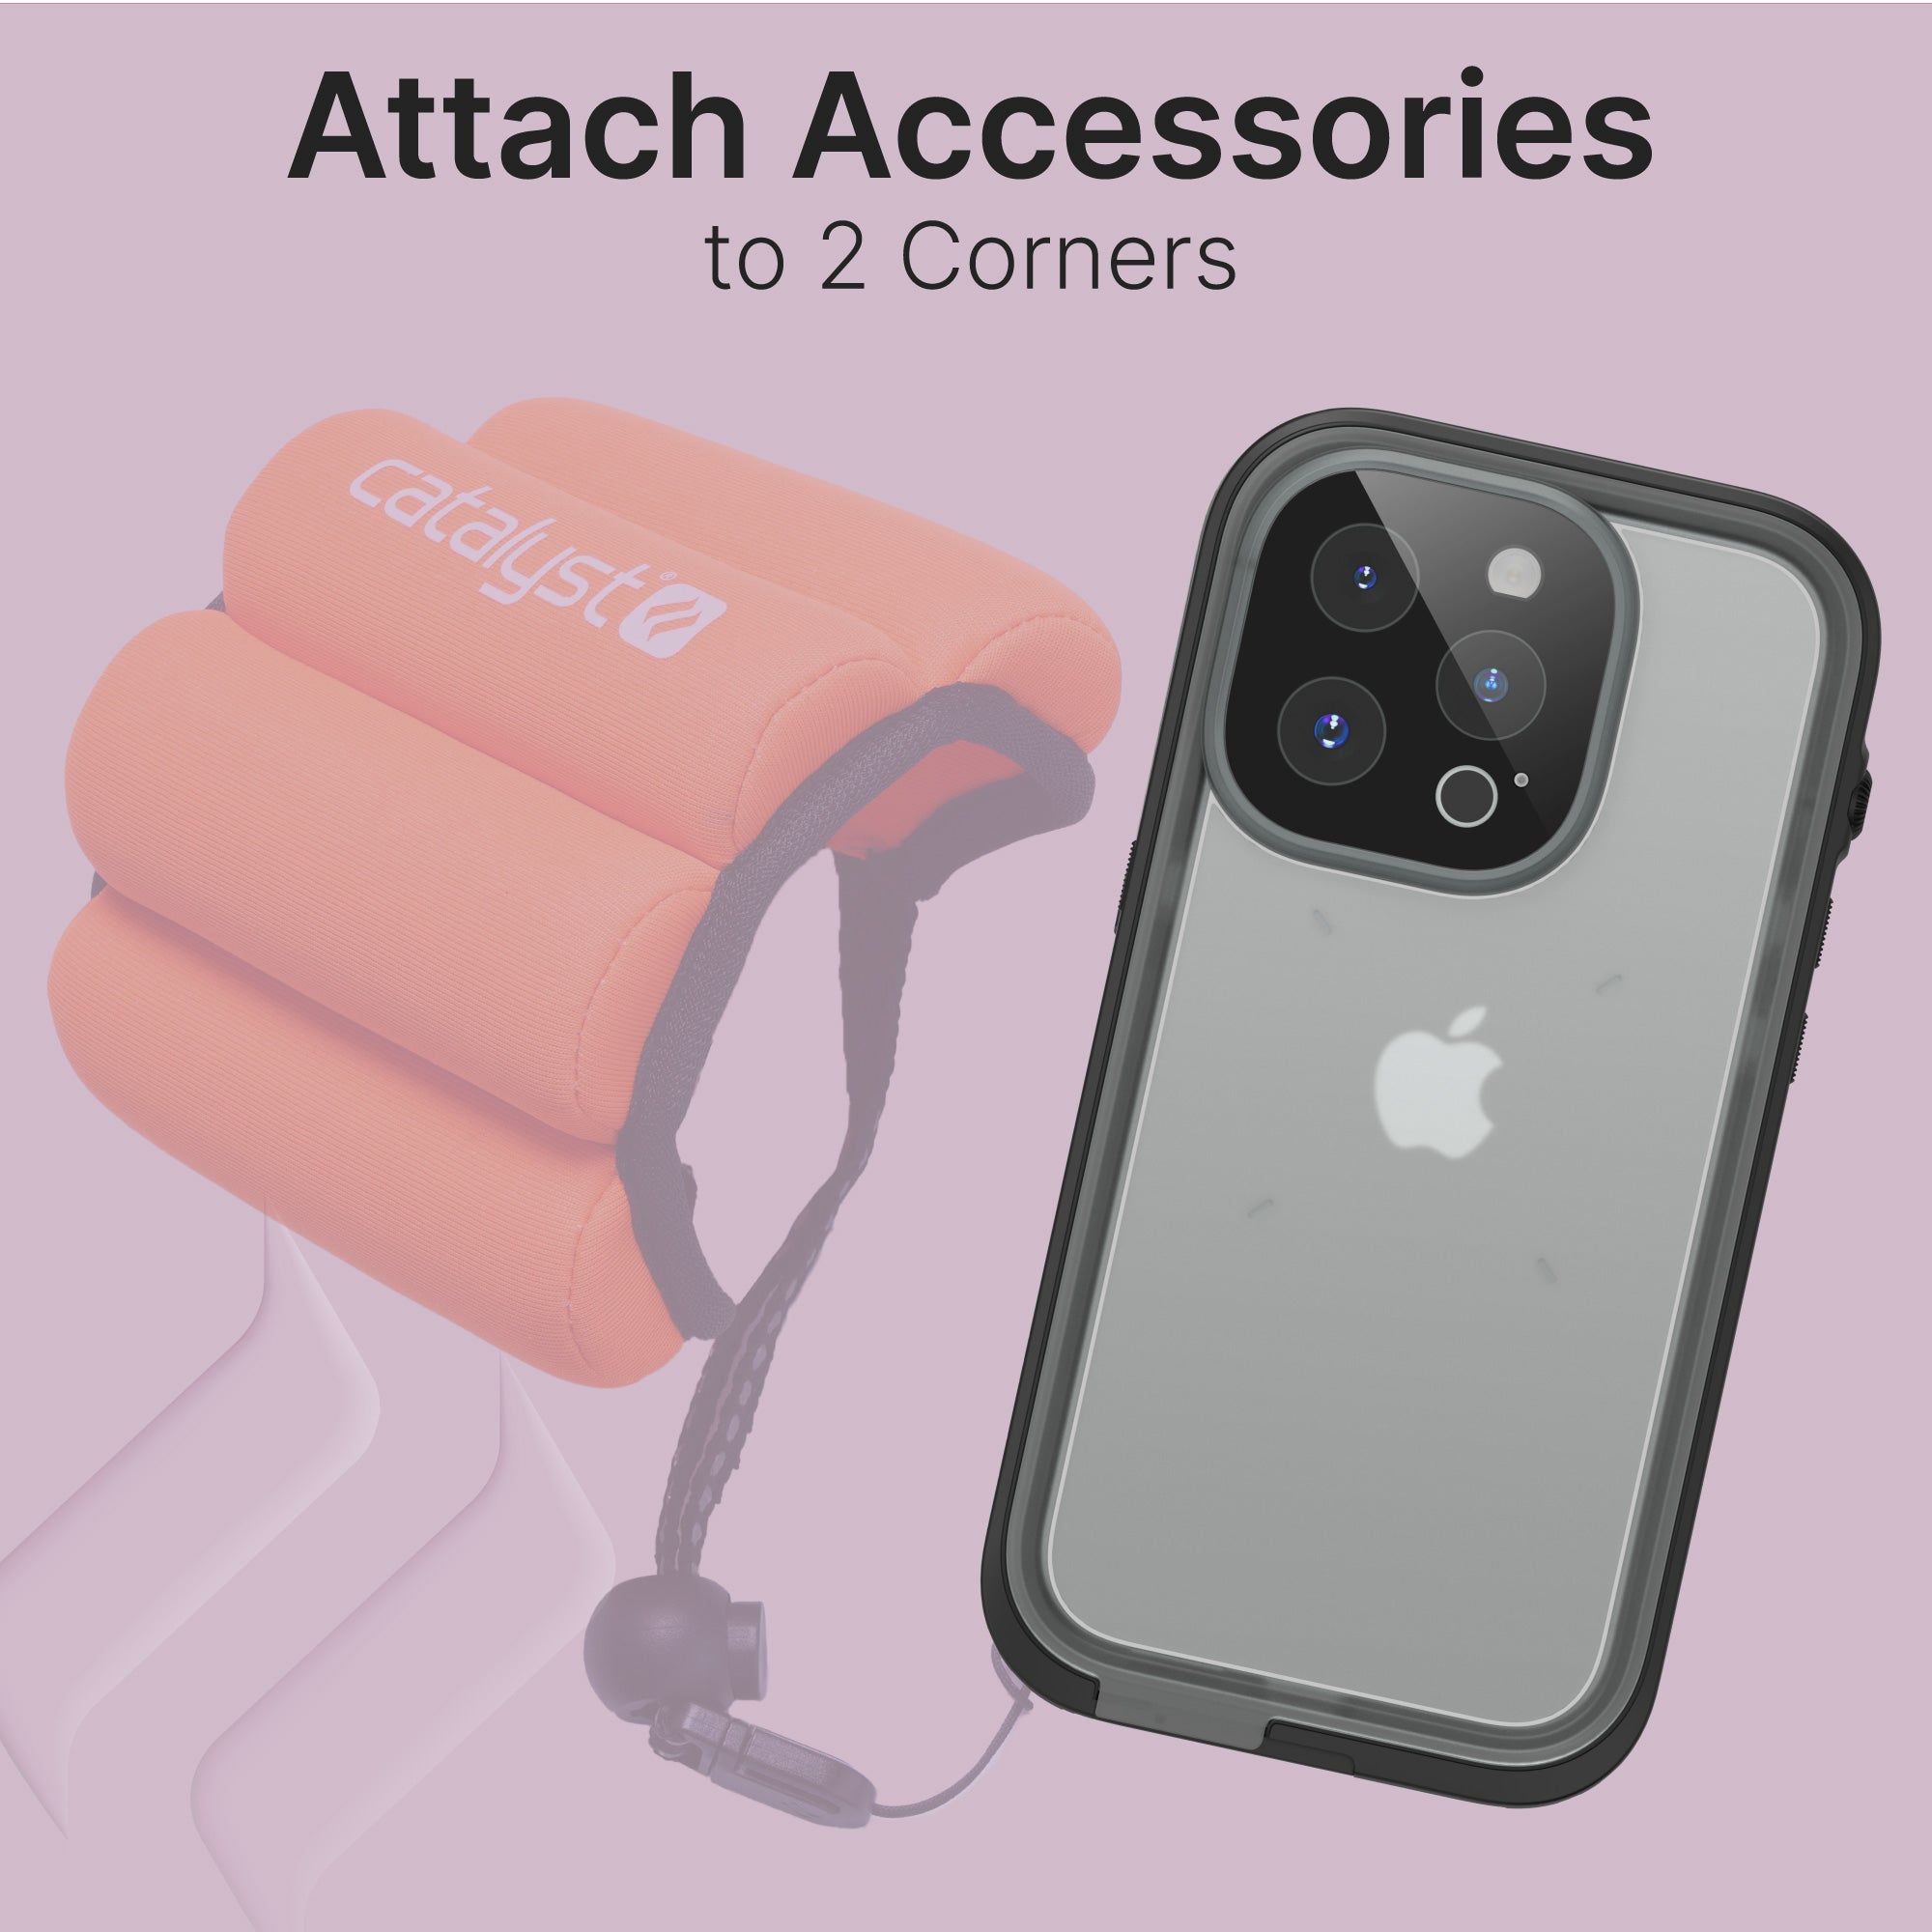 CATIPHO14BLKLP-FBA | Catalyst iPhone 14 Pro Max Waterproof Case Total Protection Floating Wrist Lanyard attached to one of the 2 corners of case